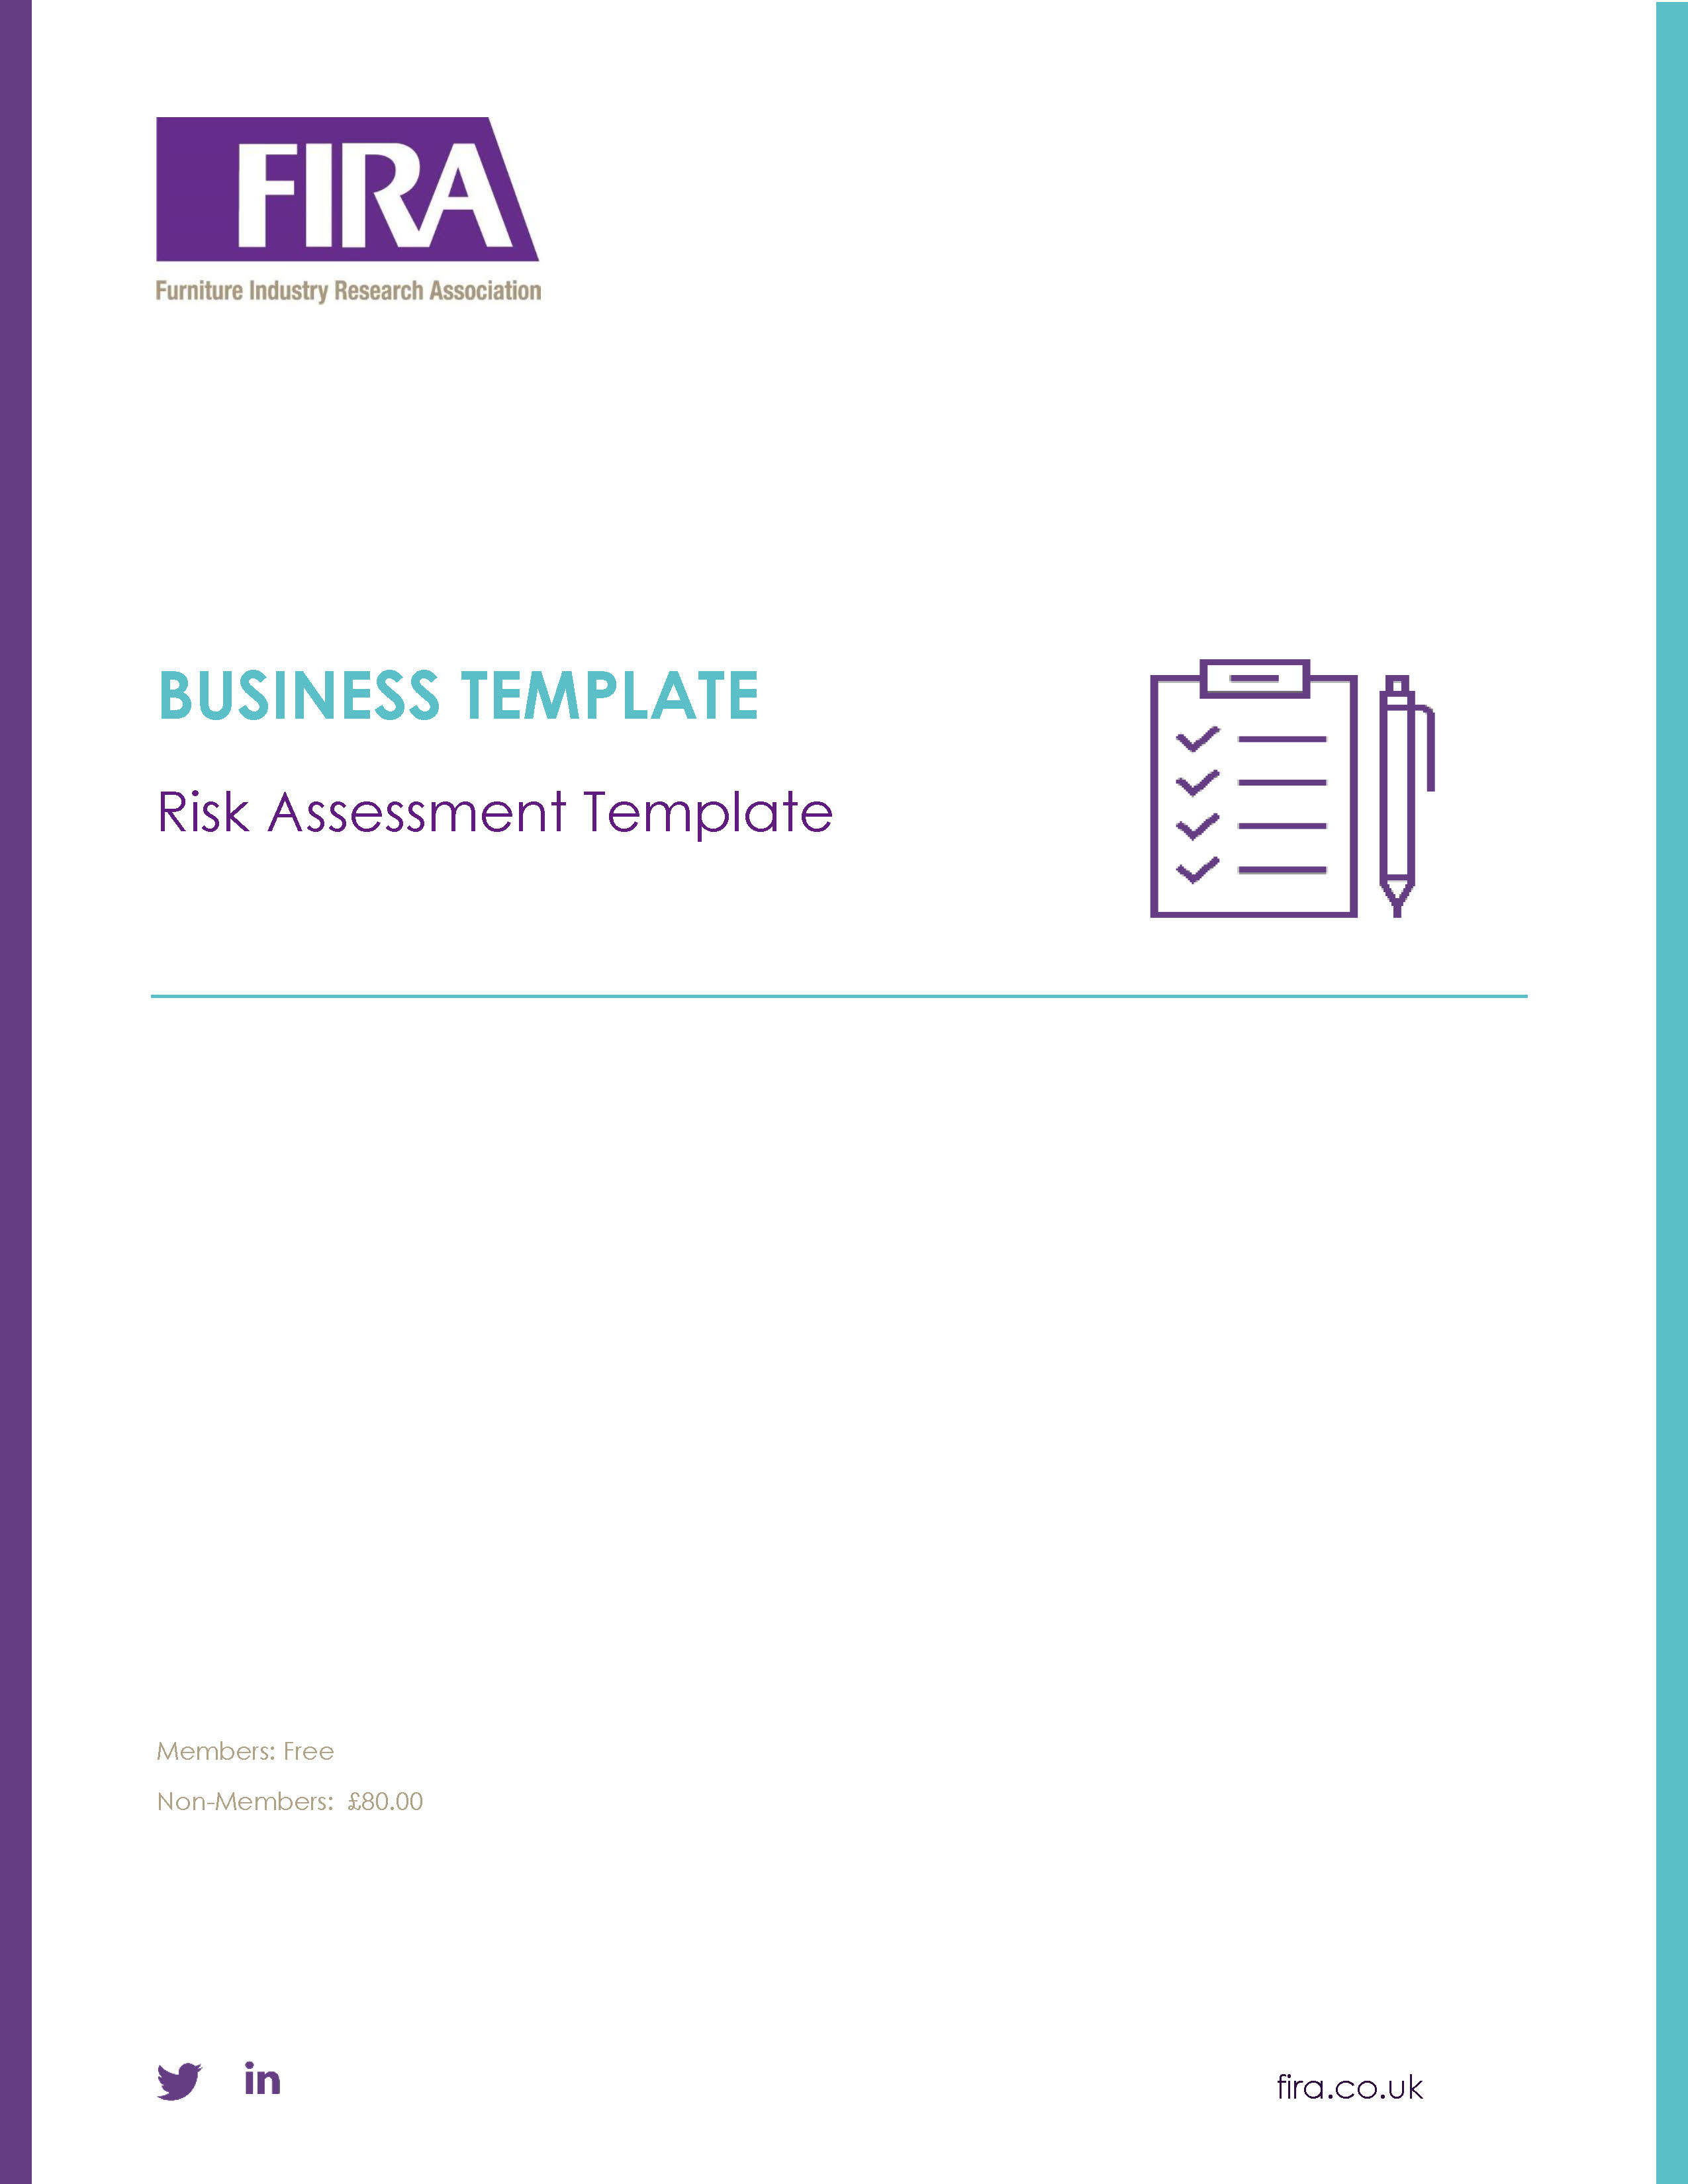 Furniture Products Risk Assessment Guidance and Template